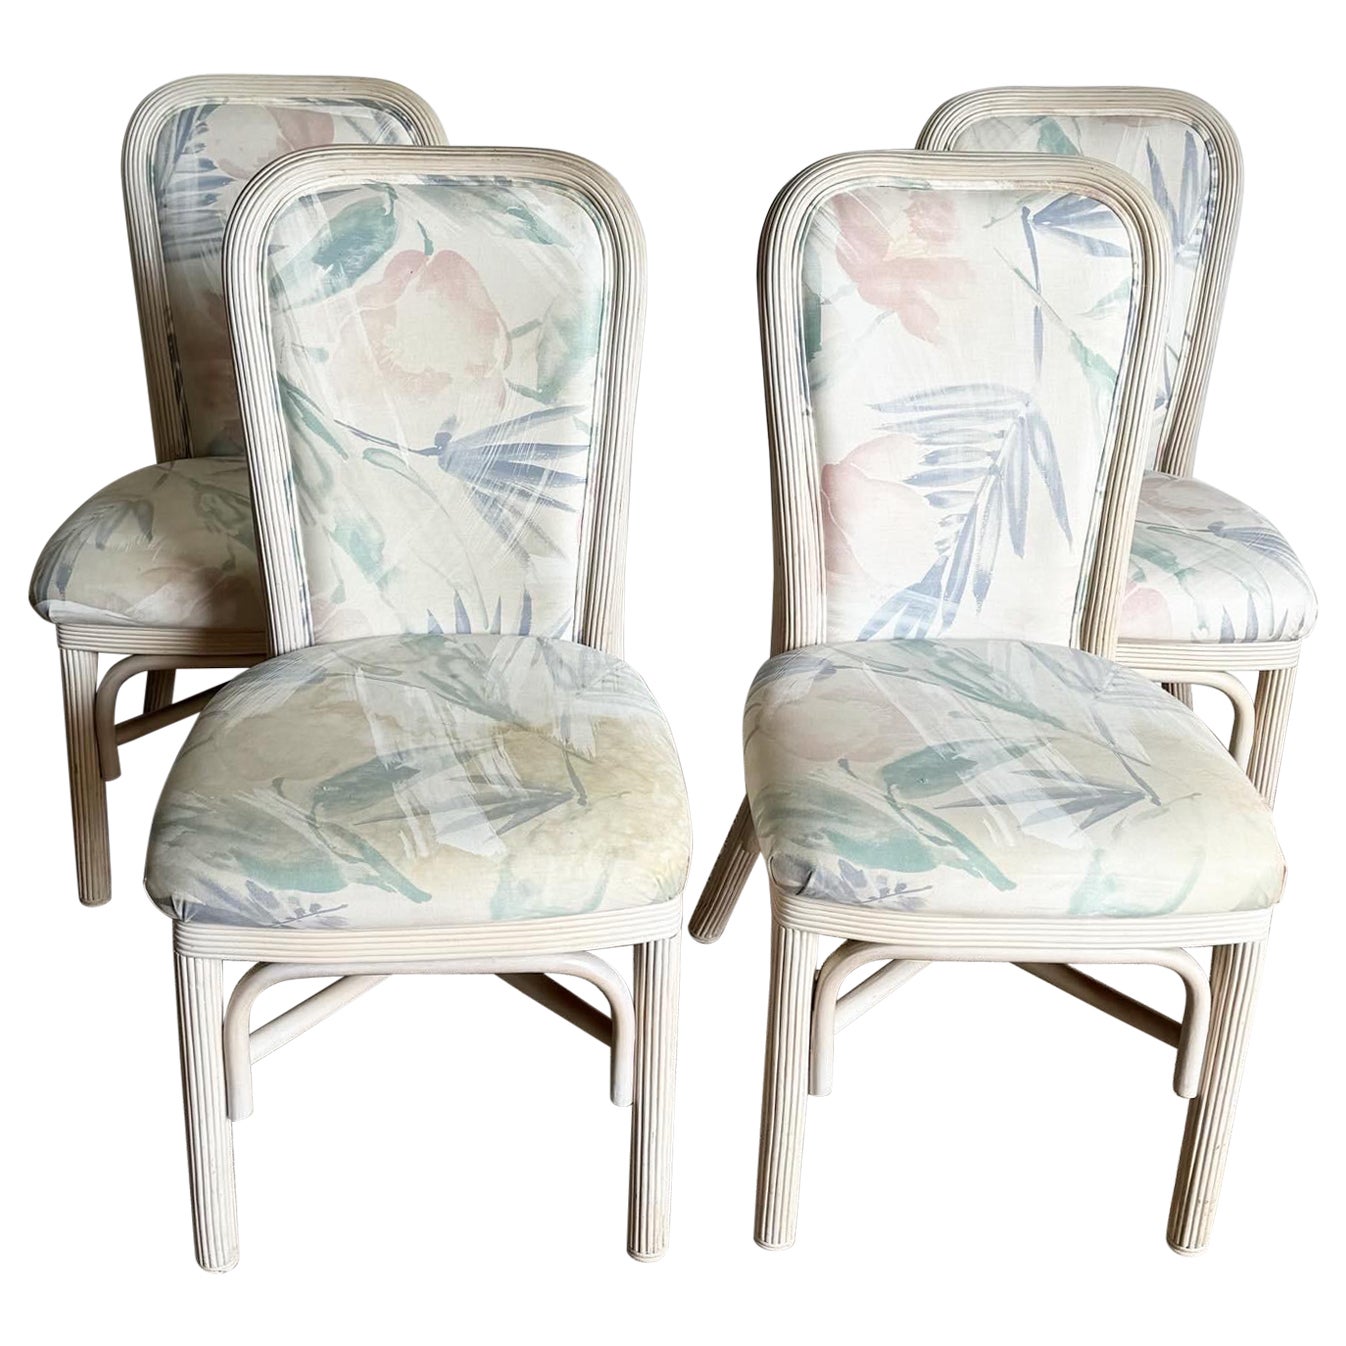 Boho Chic Pencil Reed Dining Chairs - Set of 4